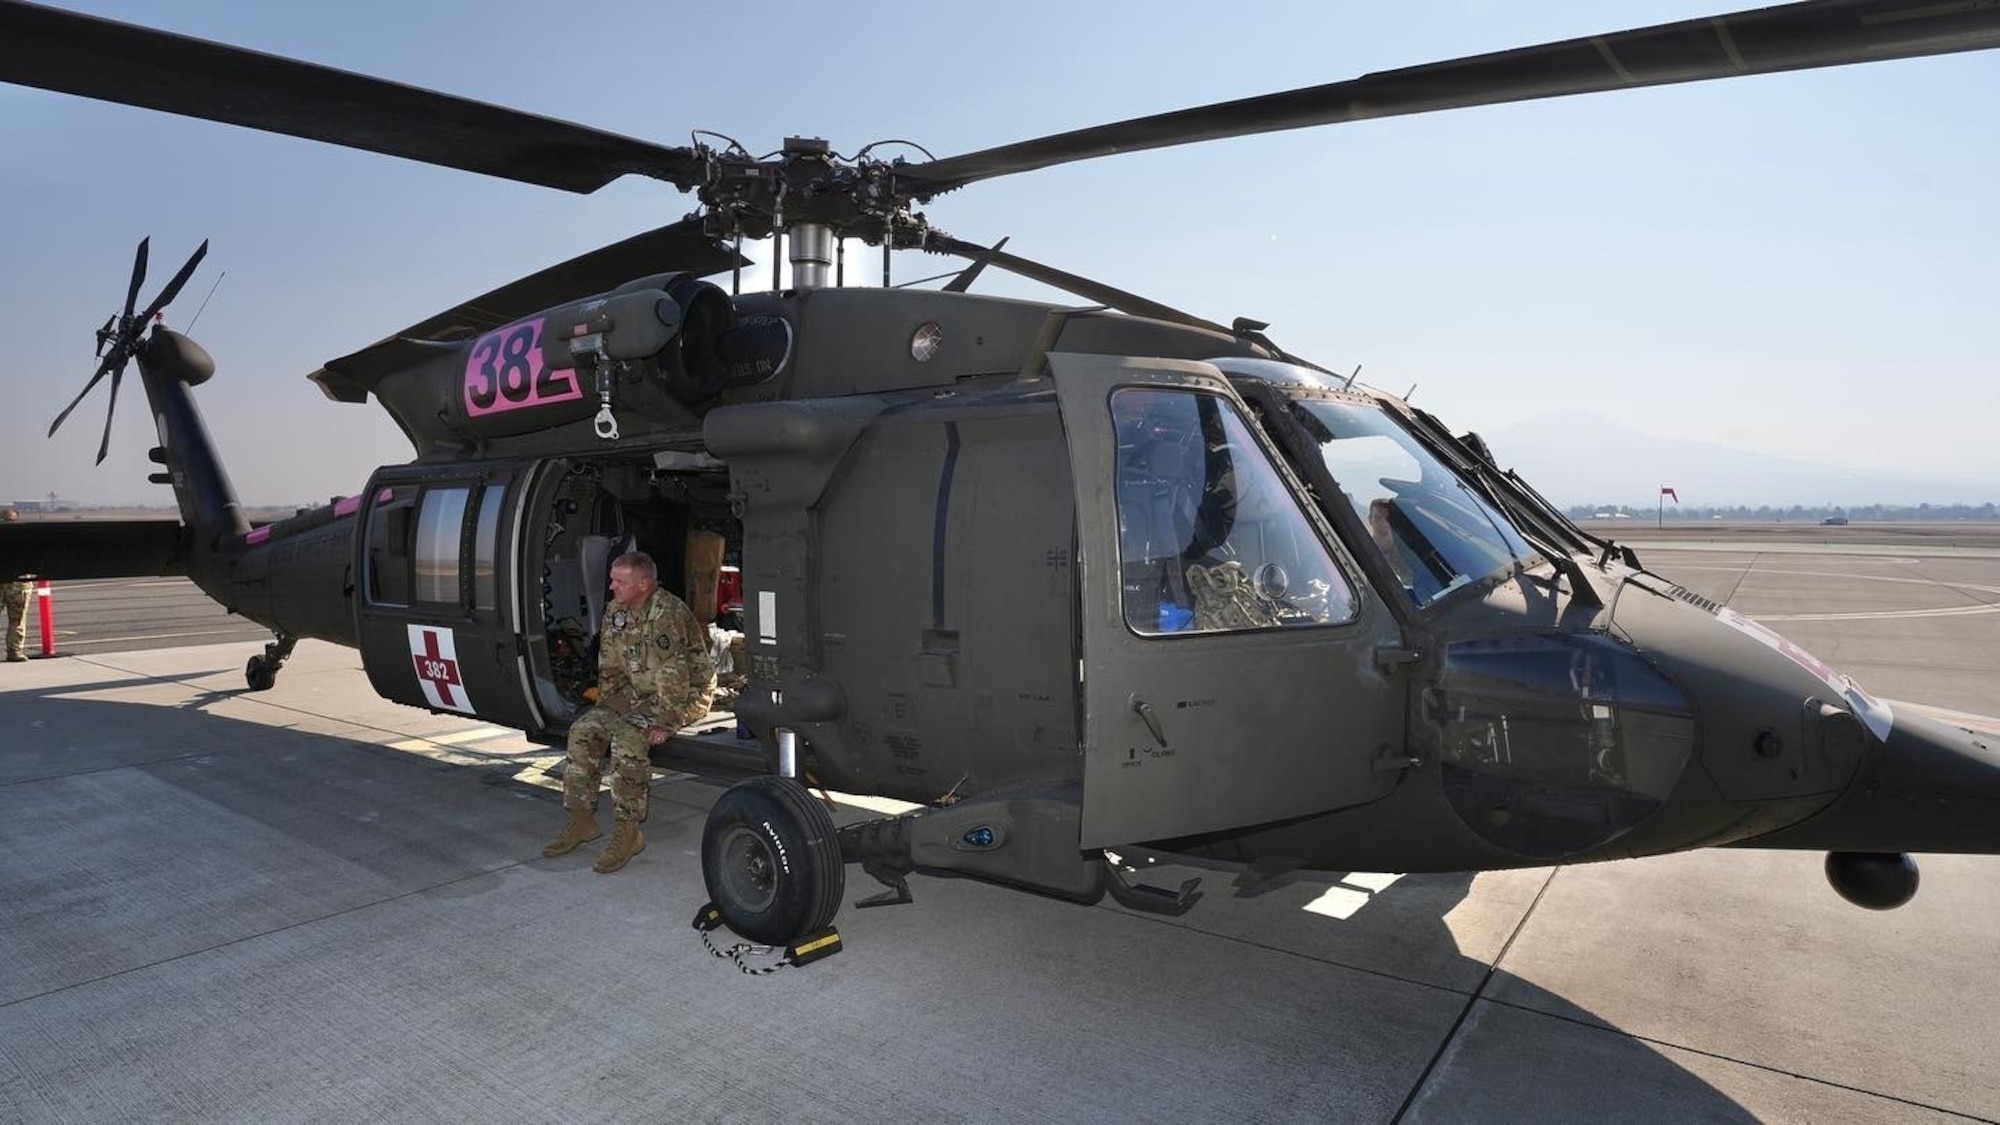 Sgt. 1st Class Mark Carter sits in his HH-60 Medevac Black Hawk helicopter on standby for a mission at Medford Airport, Ore., Sept. 2, 2022. Oregon National Guard members were supporting firefighting efforts at the Rum Creek wildfire.